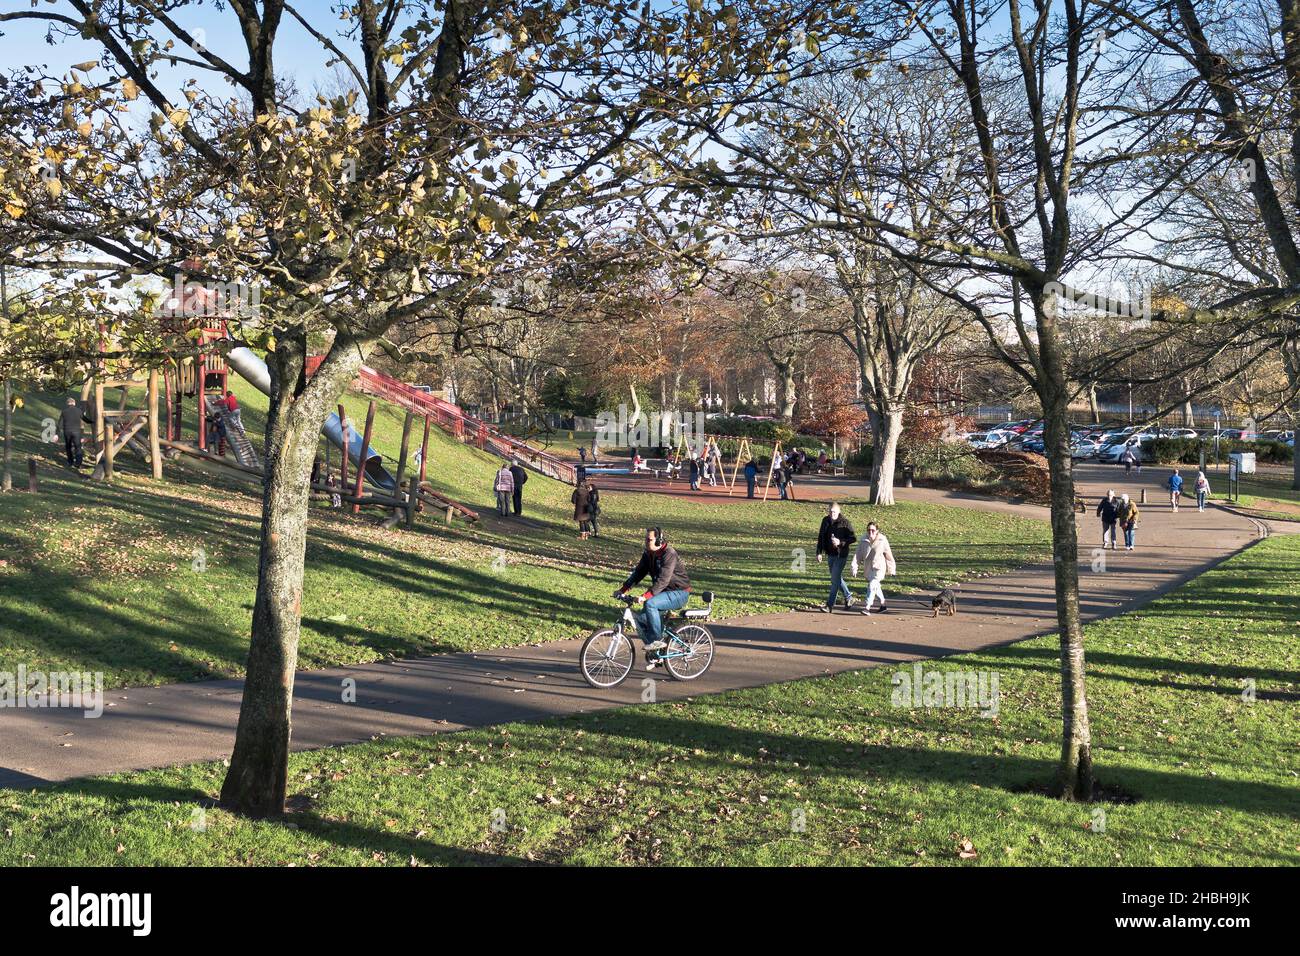 dh Duthie Park ABERDEEN SCOTLAND People sitting relaxing walking in parks winter day Stock Photo